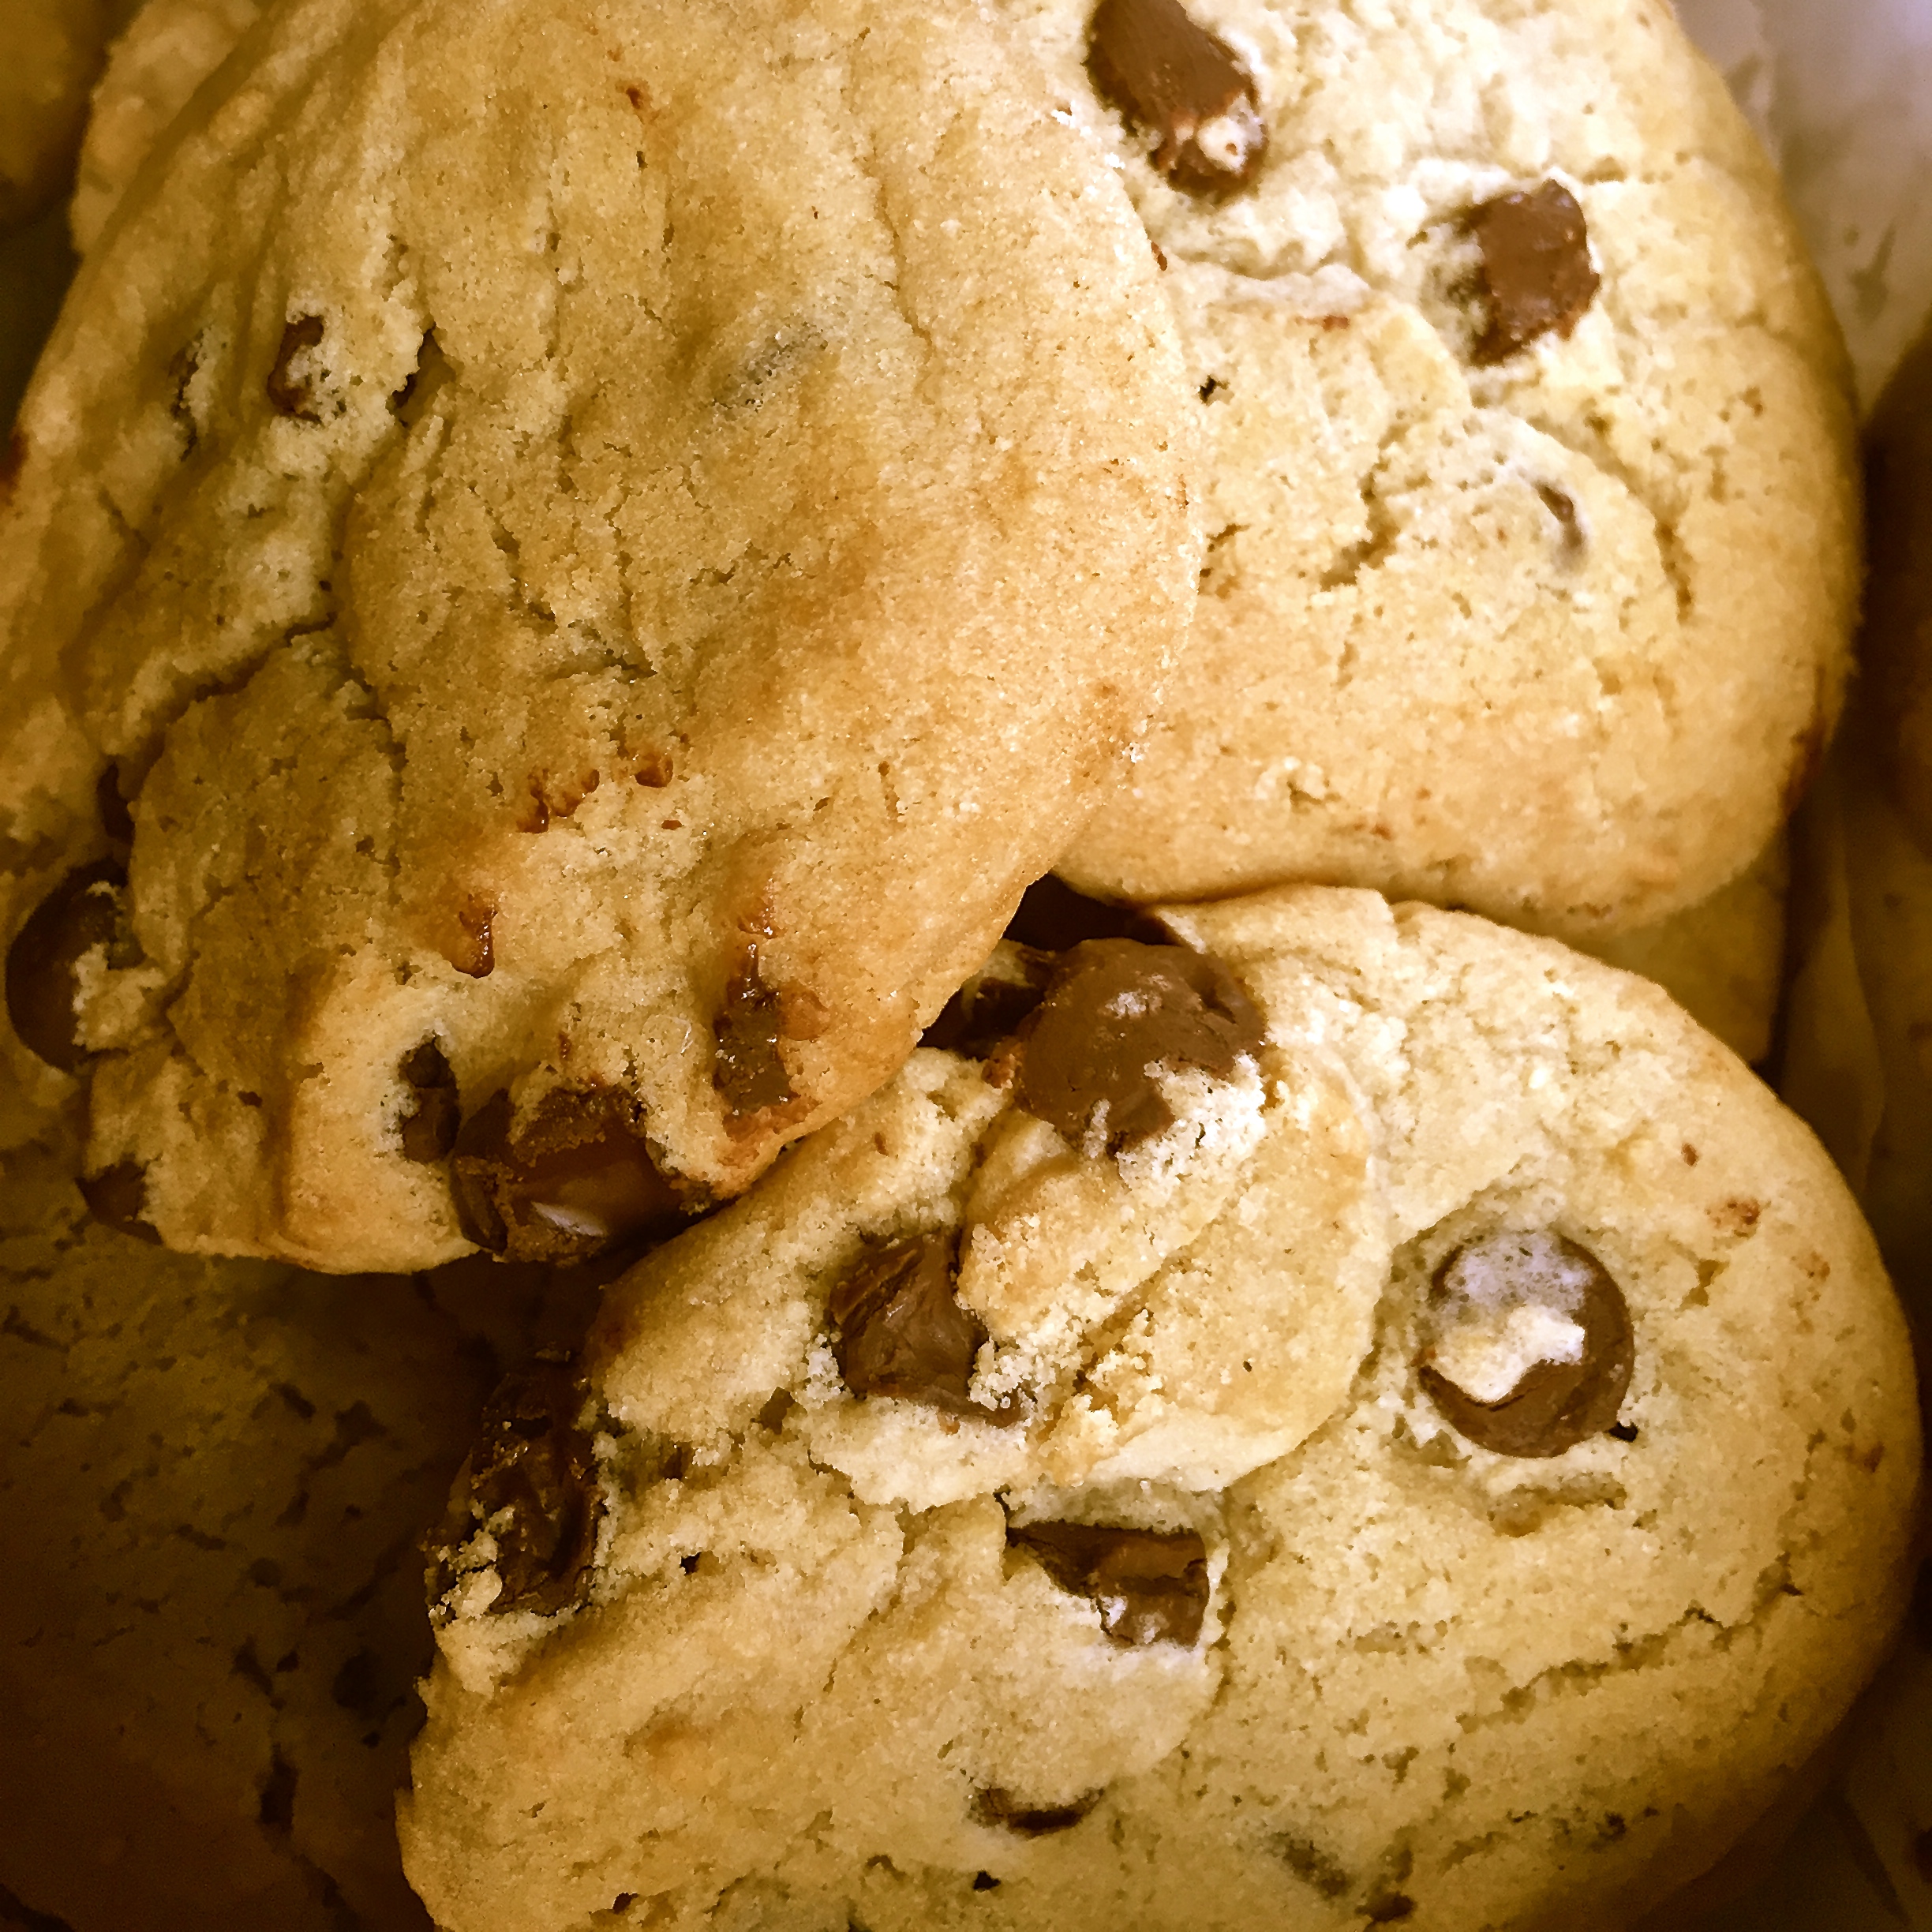 Chocolate Chip cookies from Tiffs TReats